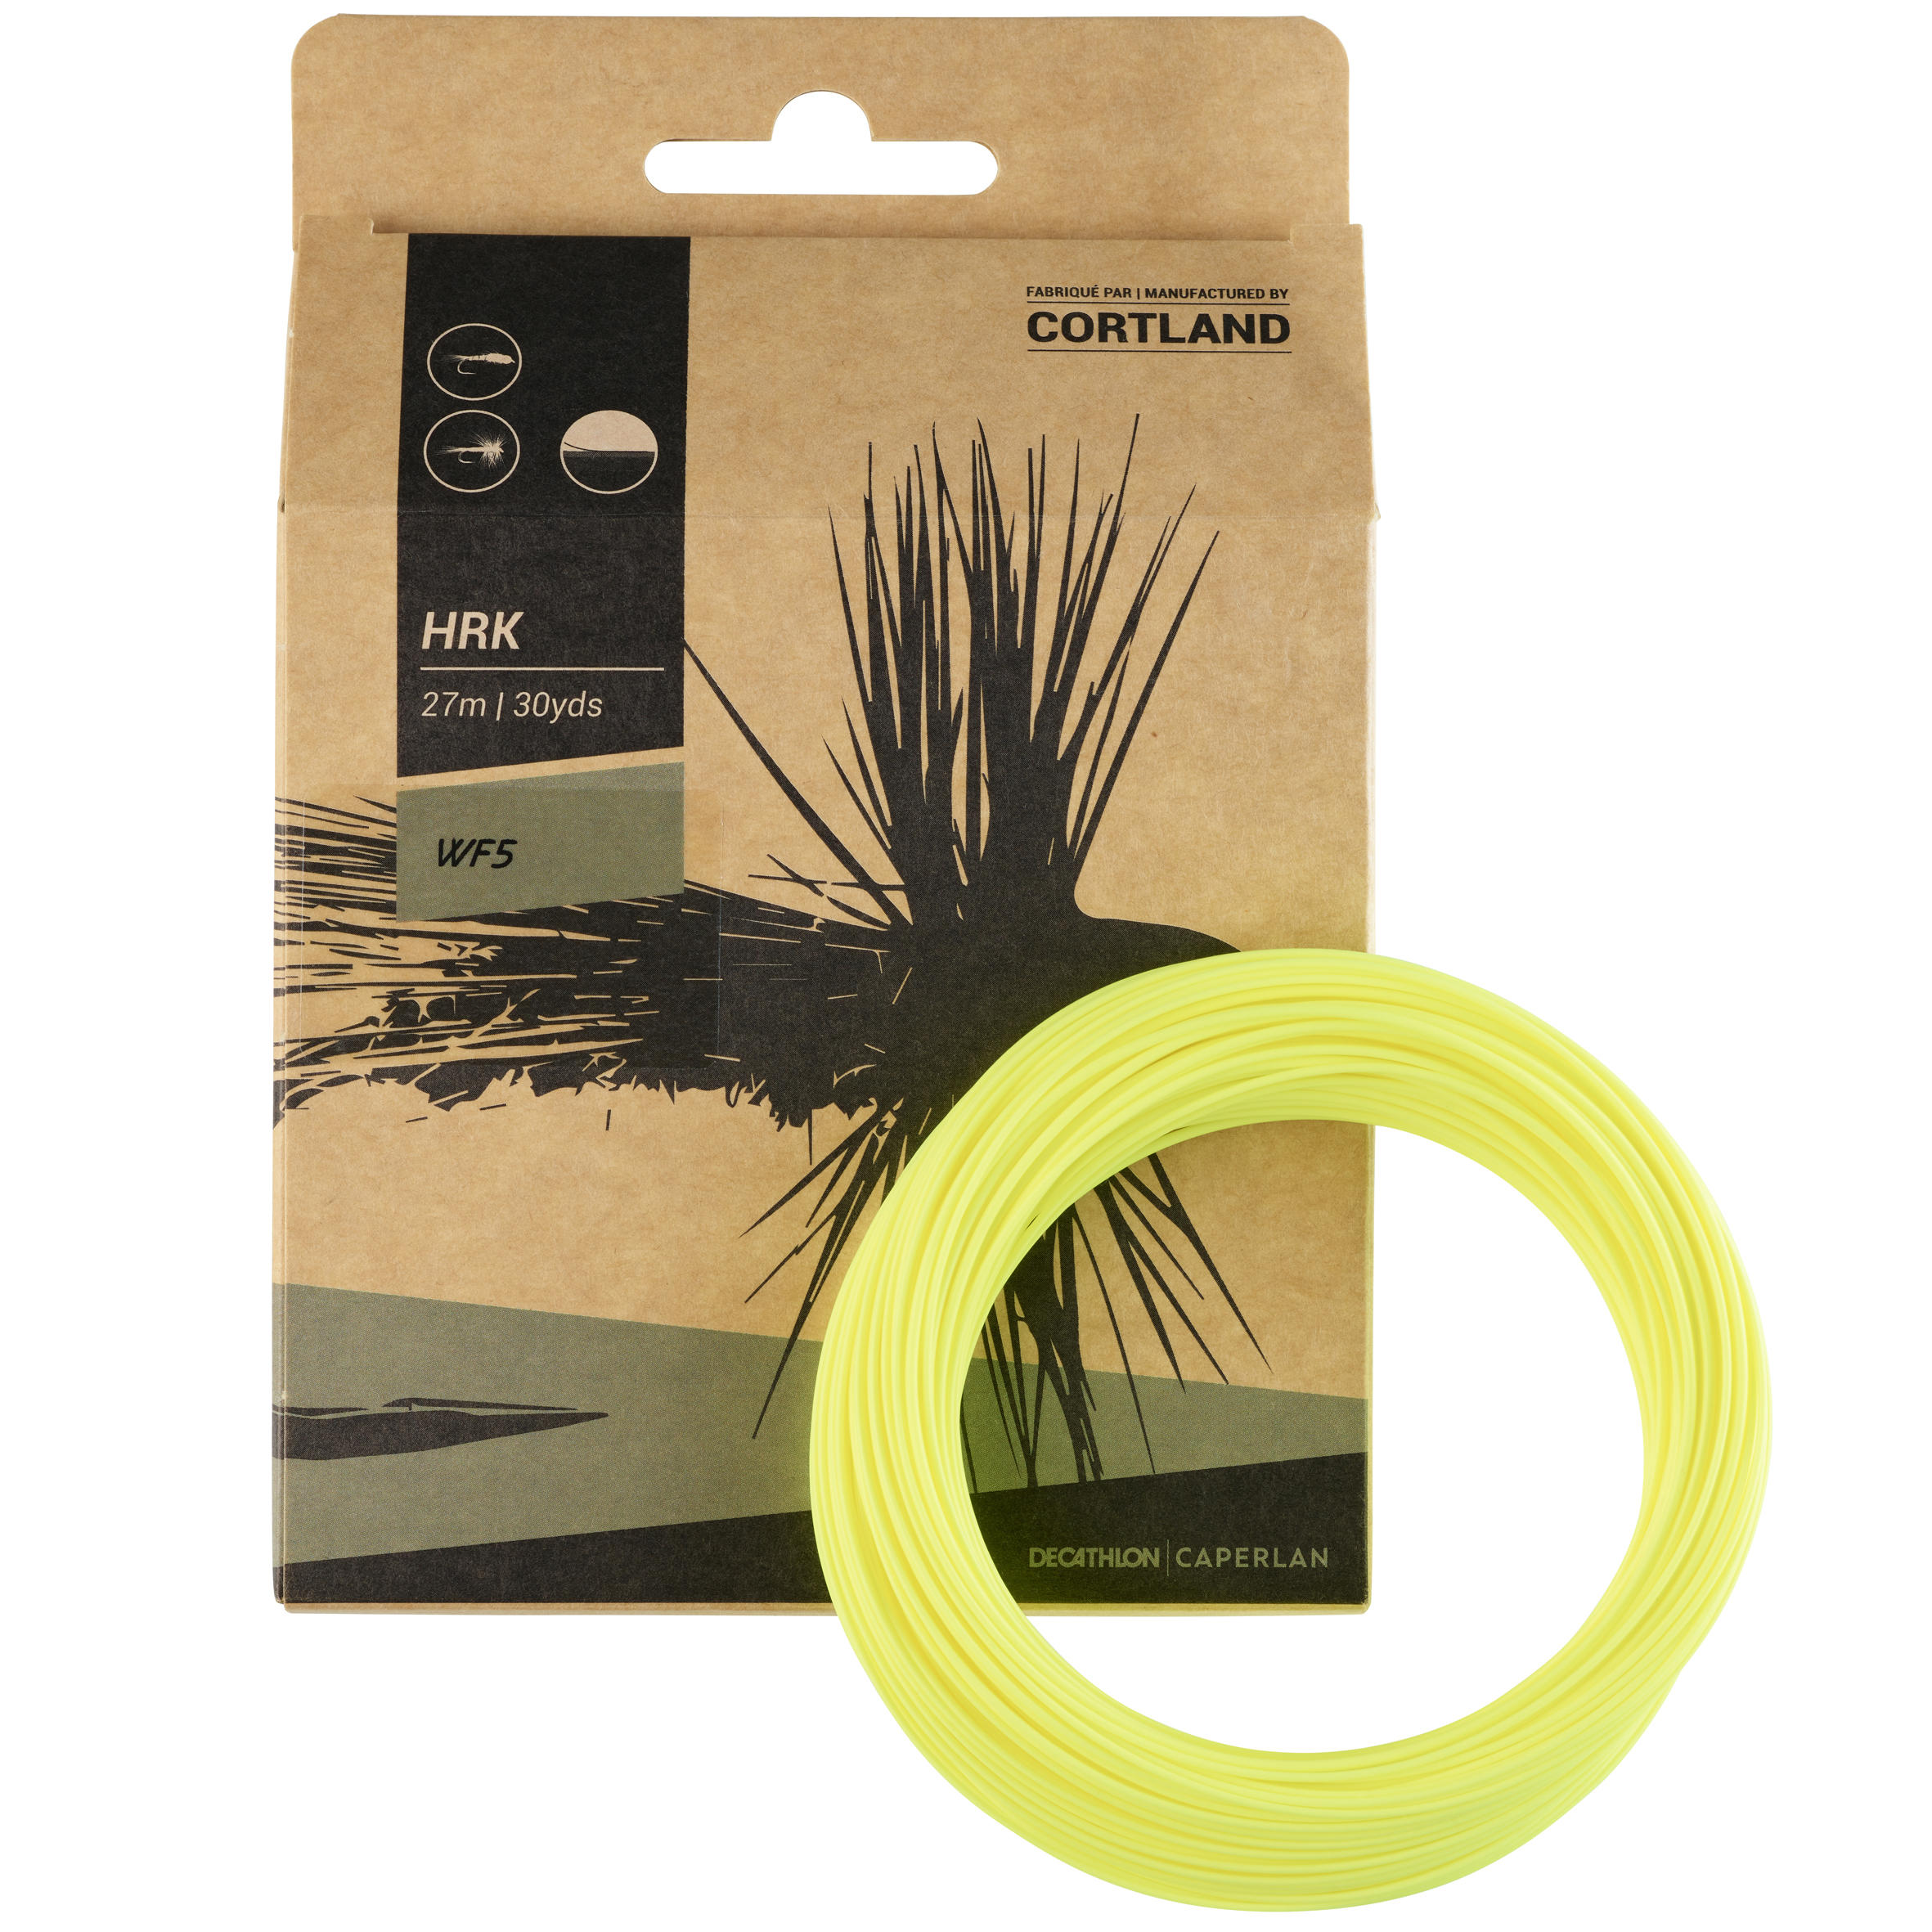 FLY FISHING FLOATING WEIGHT FORWARD SILK FLY LINE WF5 - Caperlan